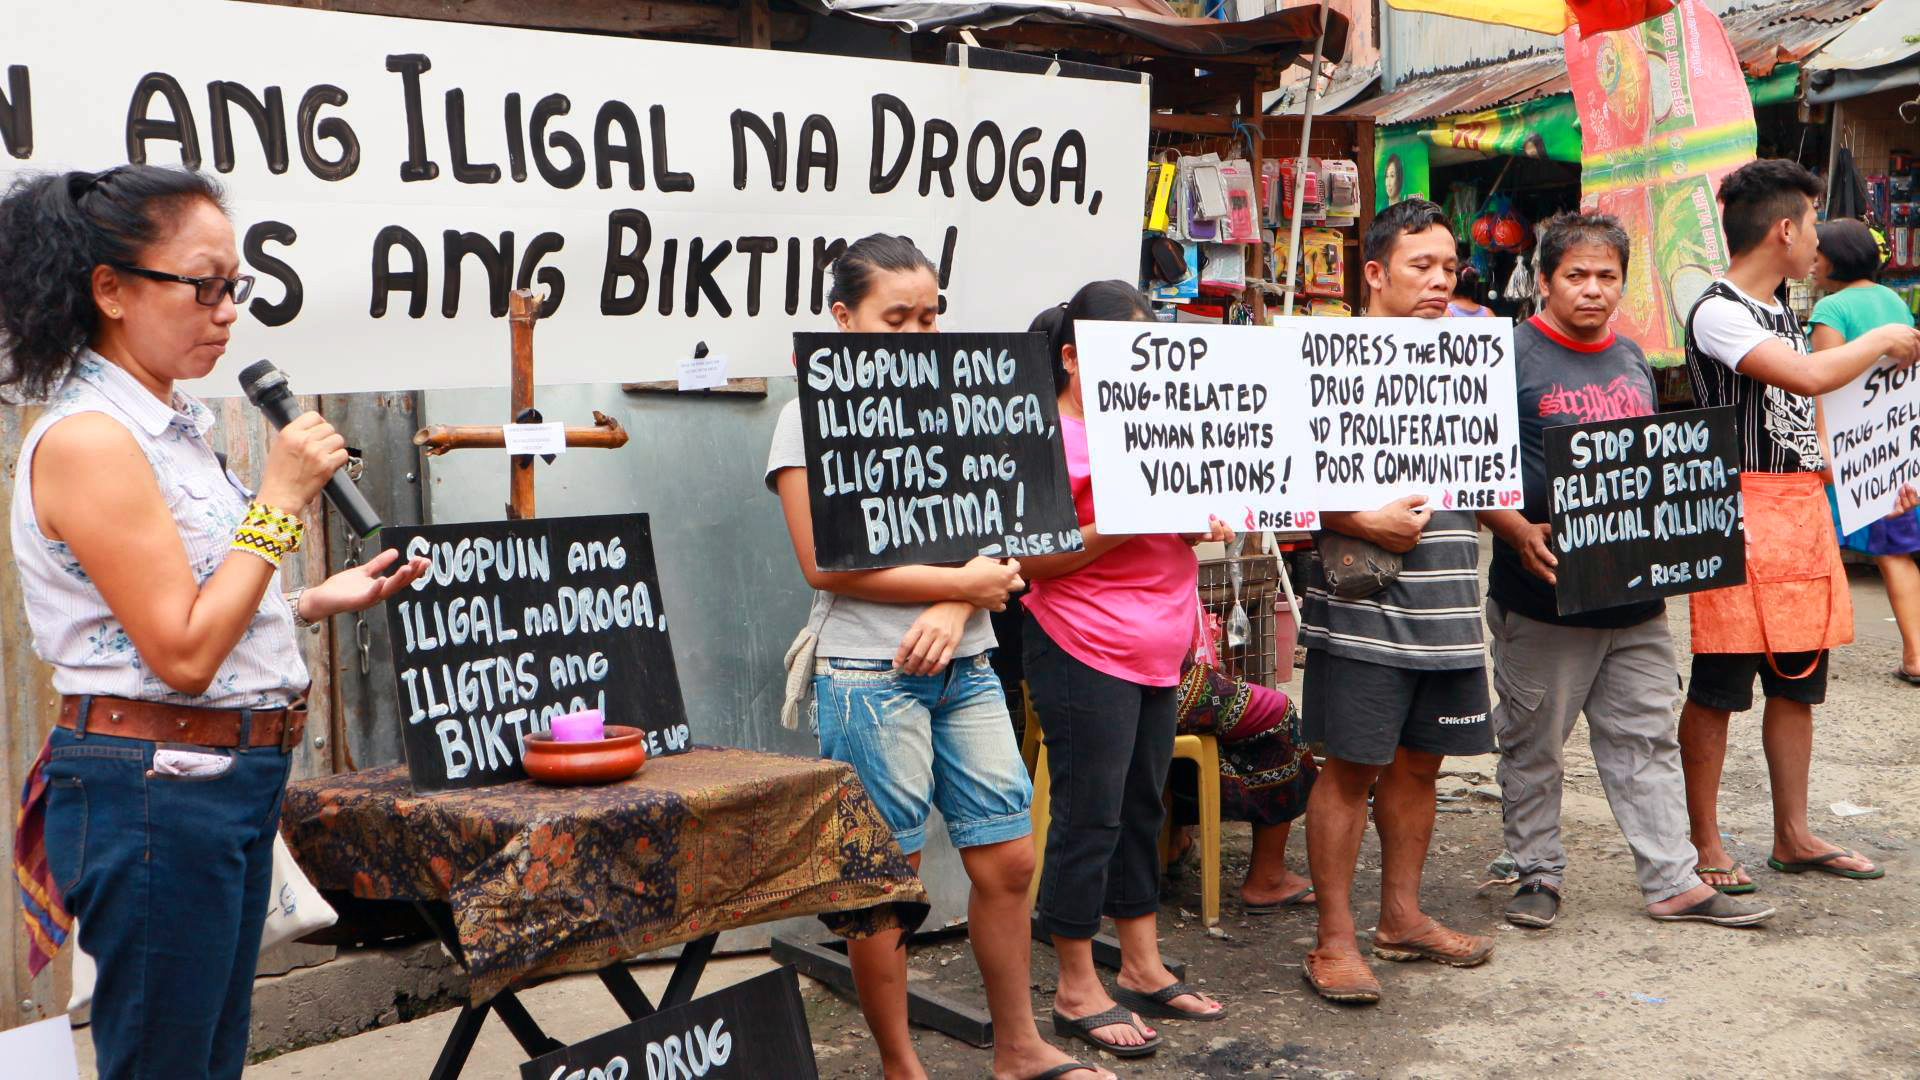 In a file photo from December 2016, Norma Dollaga, on left with microphone, speaks during an ecumenical action of Kadamay: Stop the Killings, a community organization that advocates for the poor in urban communities, in Quezon City, Philippines. The placards in Filipino say, "Dismantle illegal drugs, Save the victims!" Photo courtesy of Norma Dollaga.